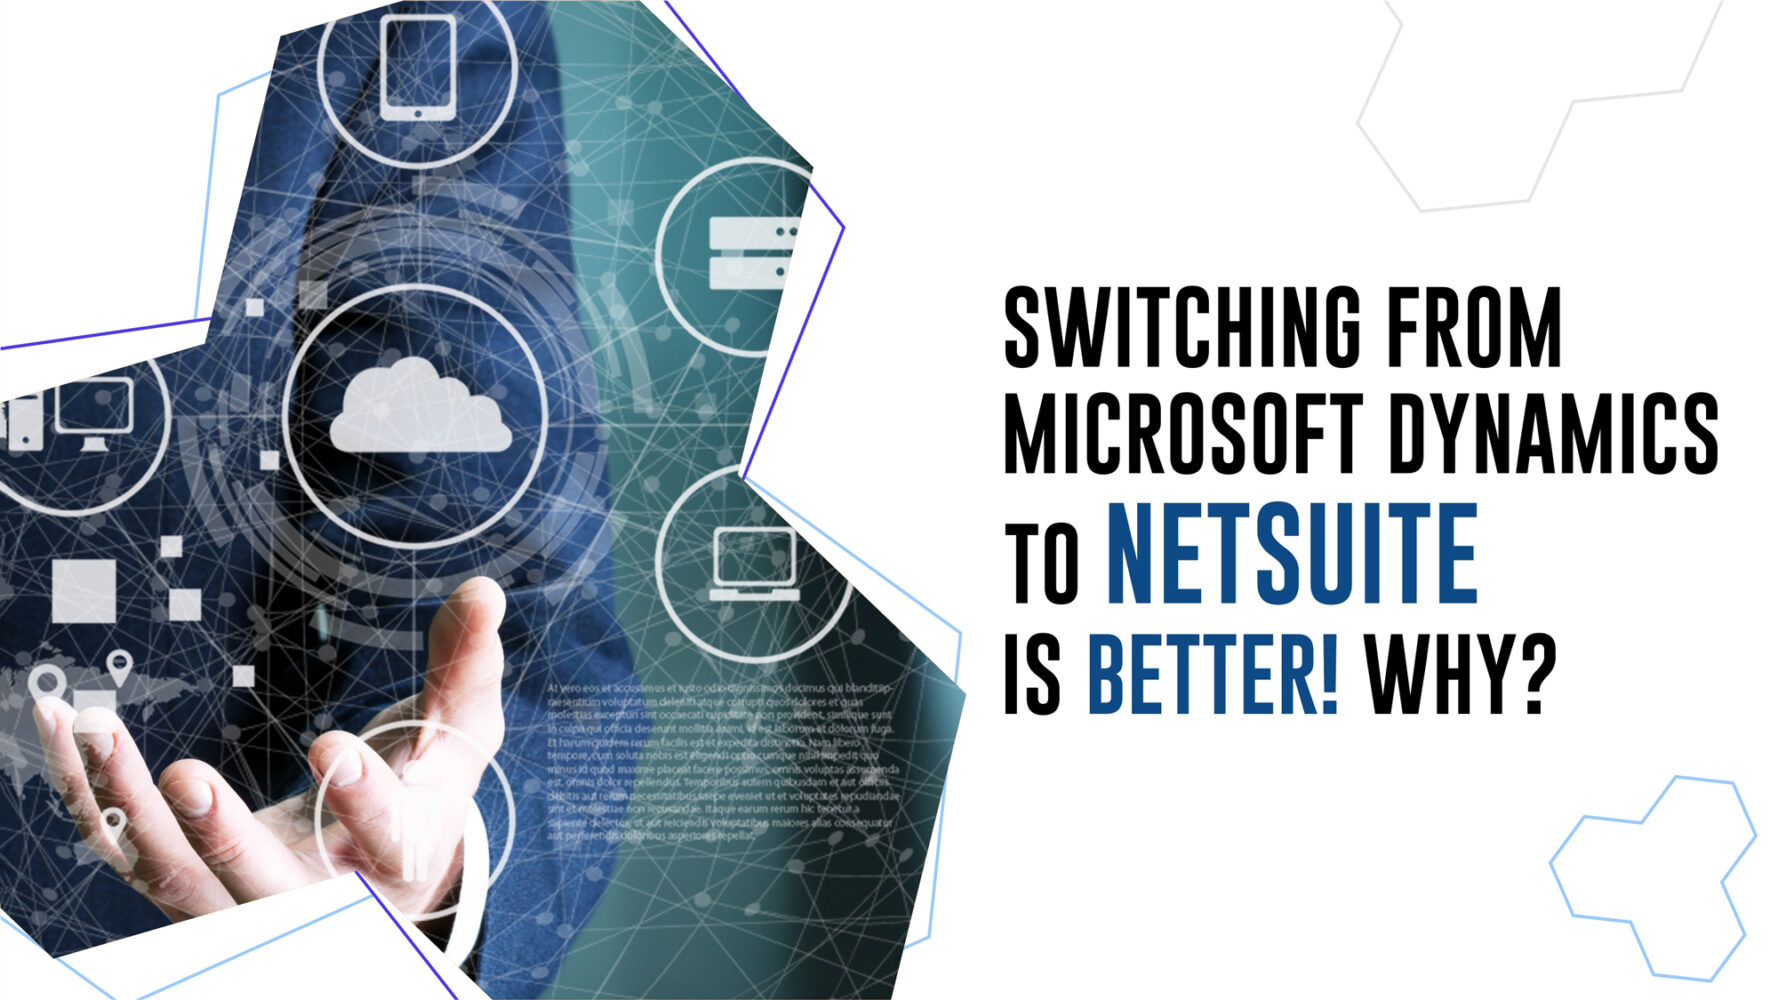 Tangenz IT System Integrator- Switching from Microsoft Dynamics to NetSuite is Better! Why?